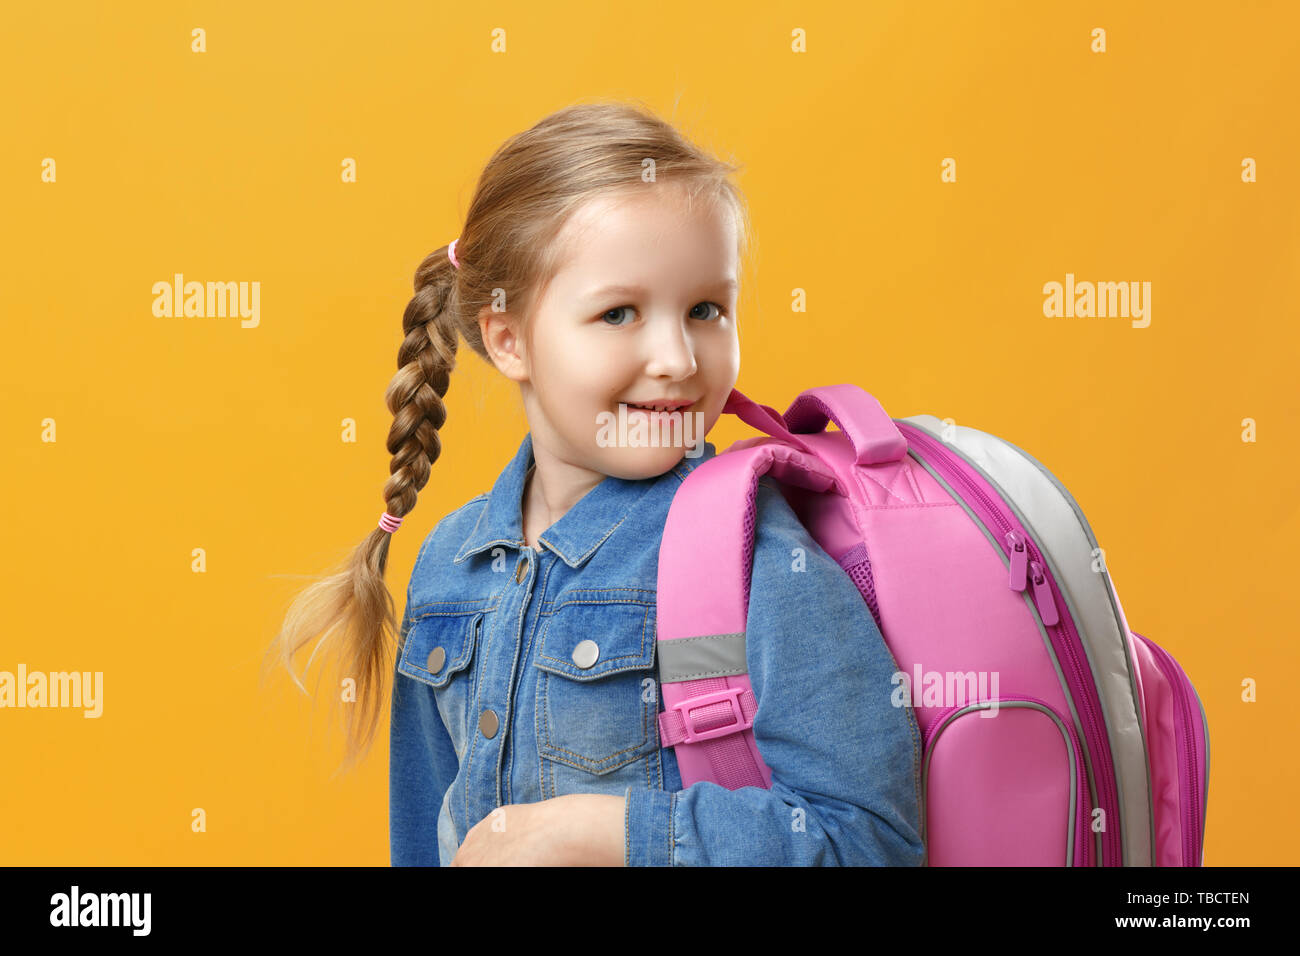 Portrait of a little girl schoolgirl with a backpack on a yellow background. Back to school. The concept of education. Stock Photo